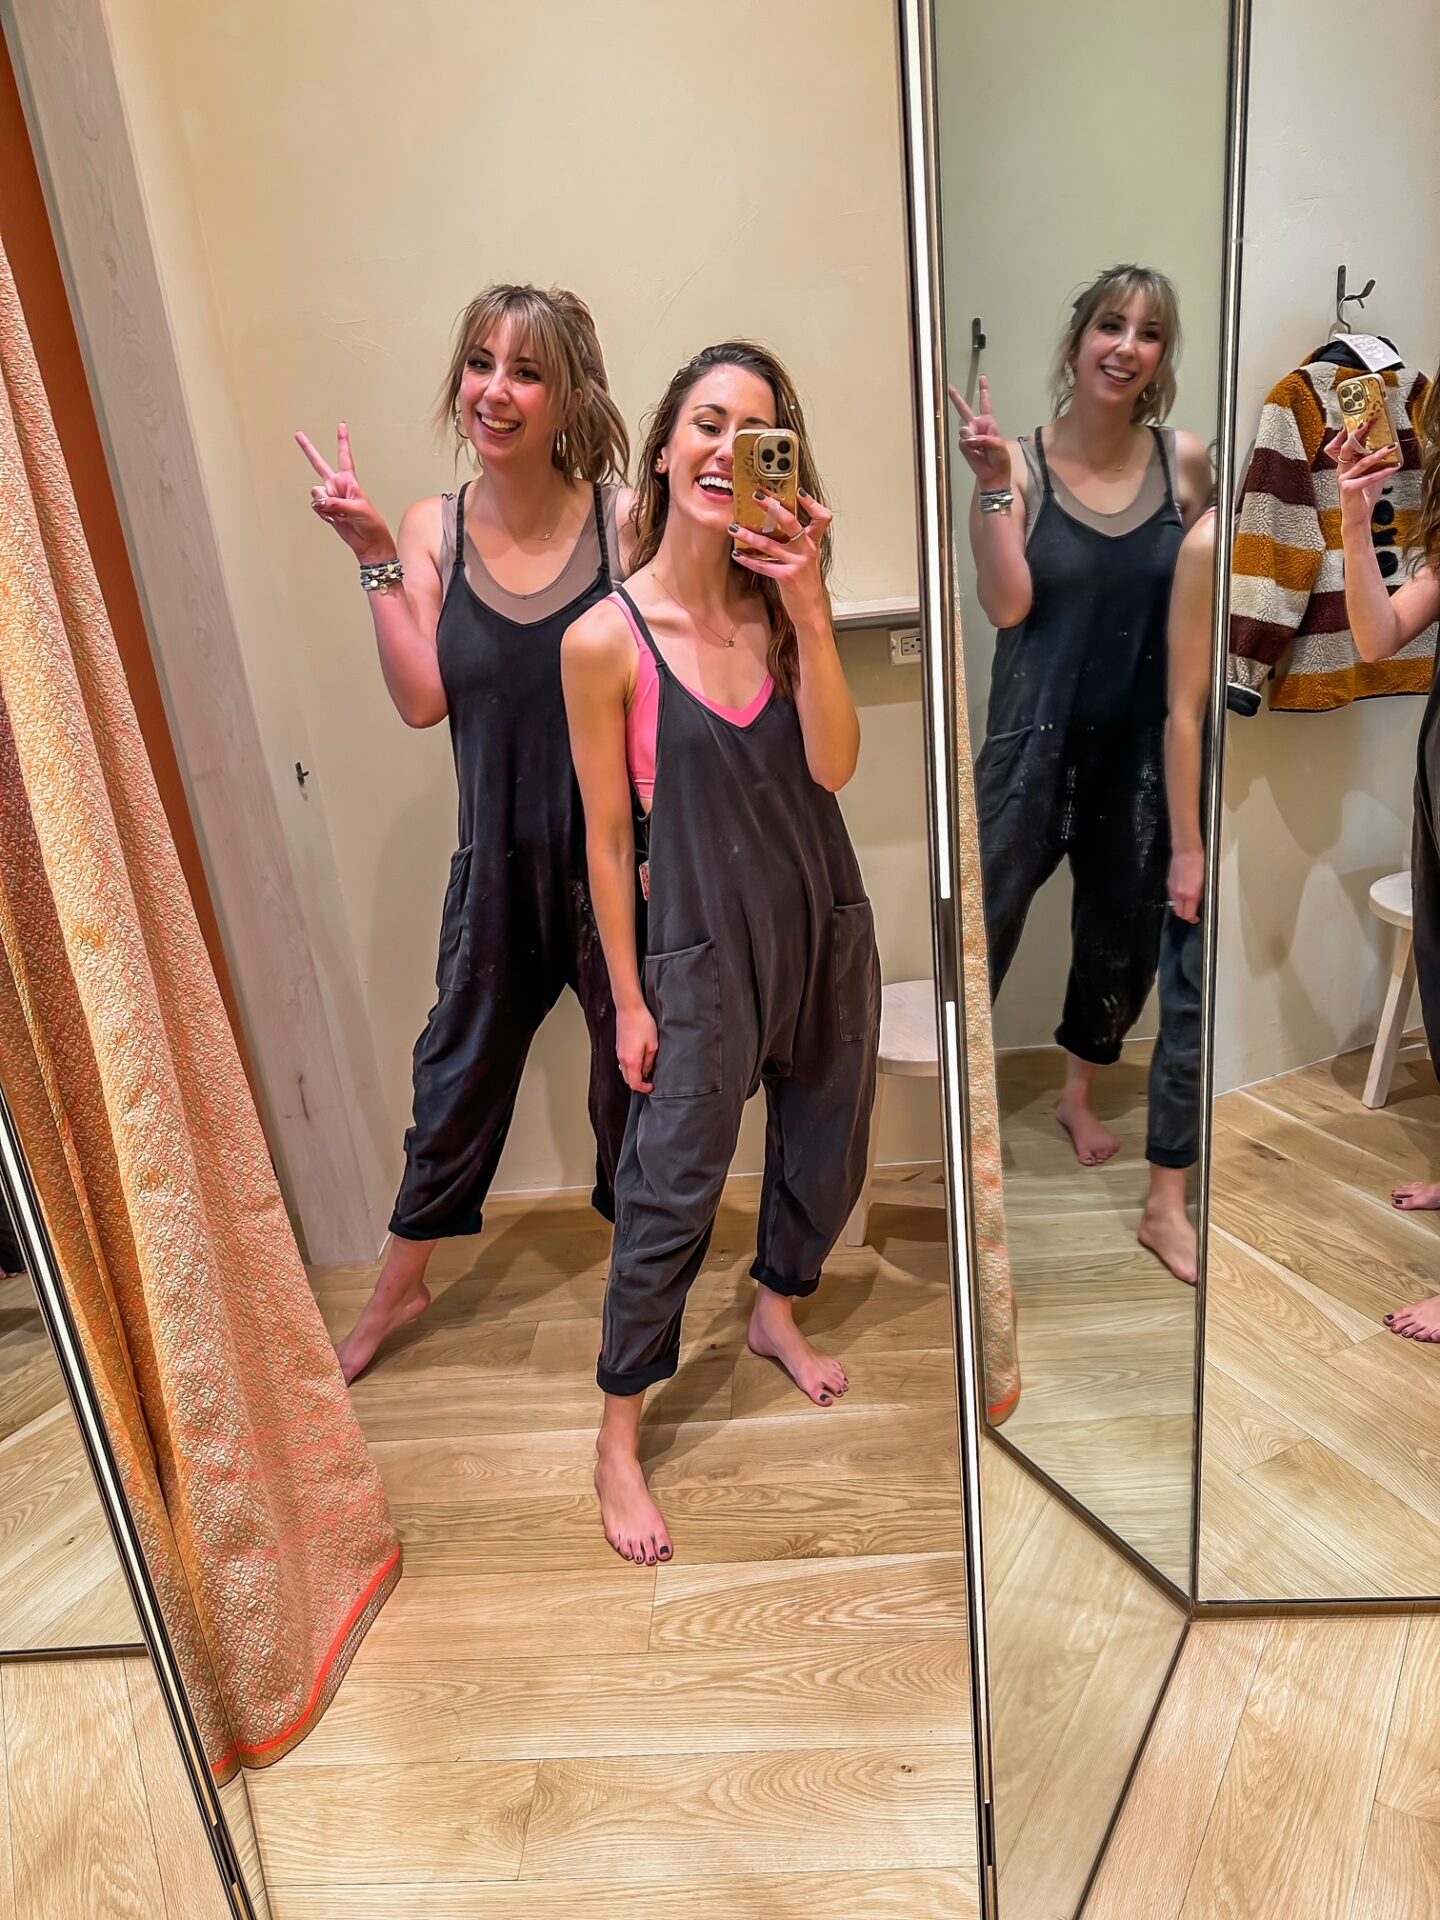 Free People Hot Shot Onesie - COOL SH*T I LOVELOVELOVE, Monthly Favorites, October 2022 on Coming Up Roses